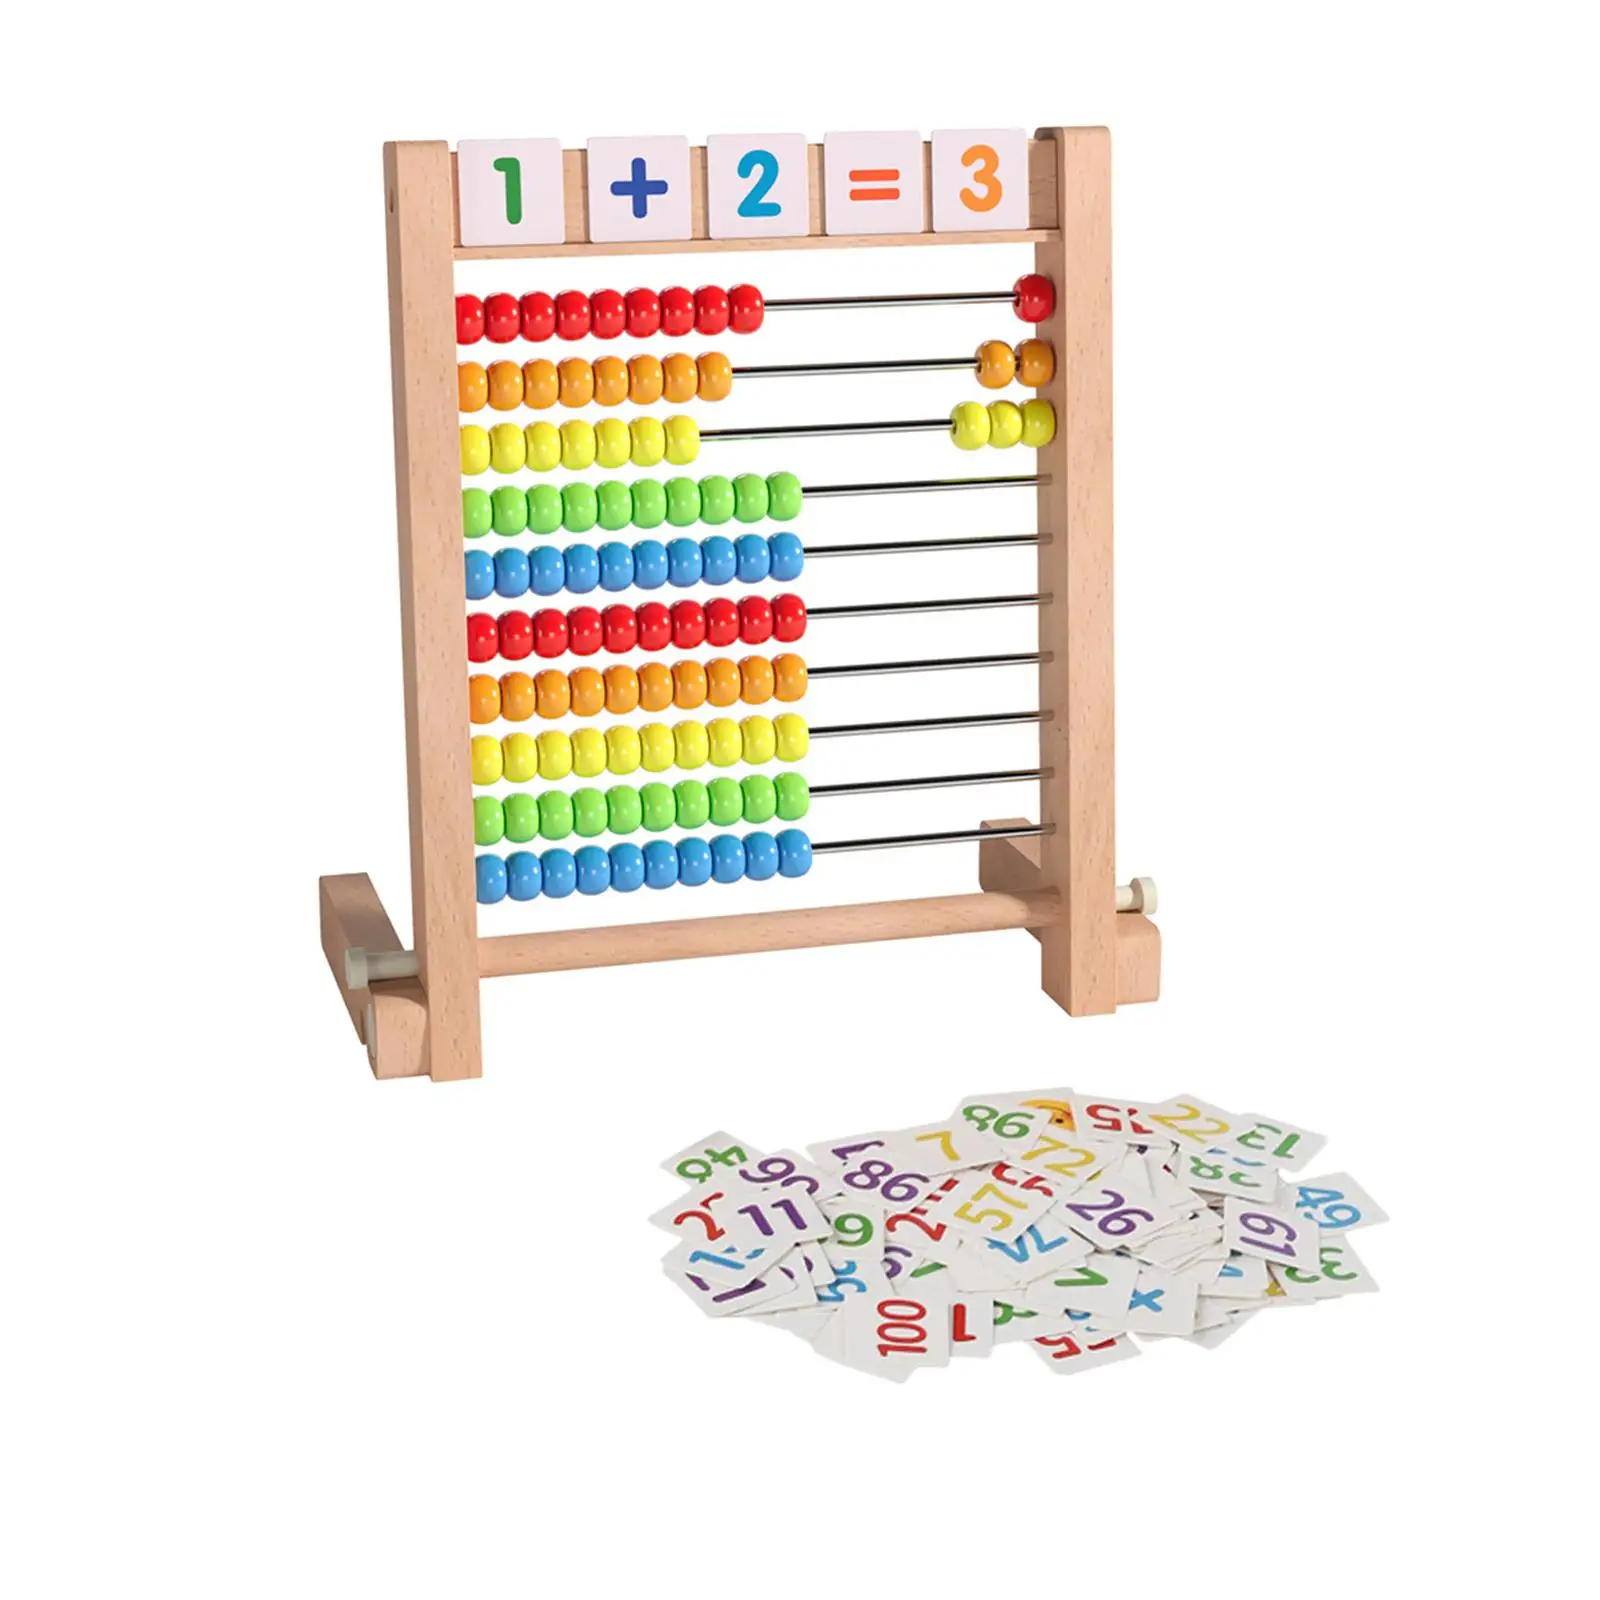 Colorful Wooden Abacus Ten Frame Set Montessori Educational Counting Toy for Children Elementary Preschool Kindergarten Learning